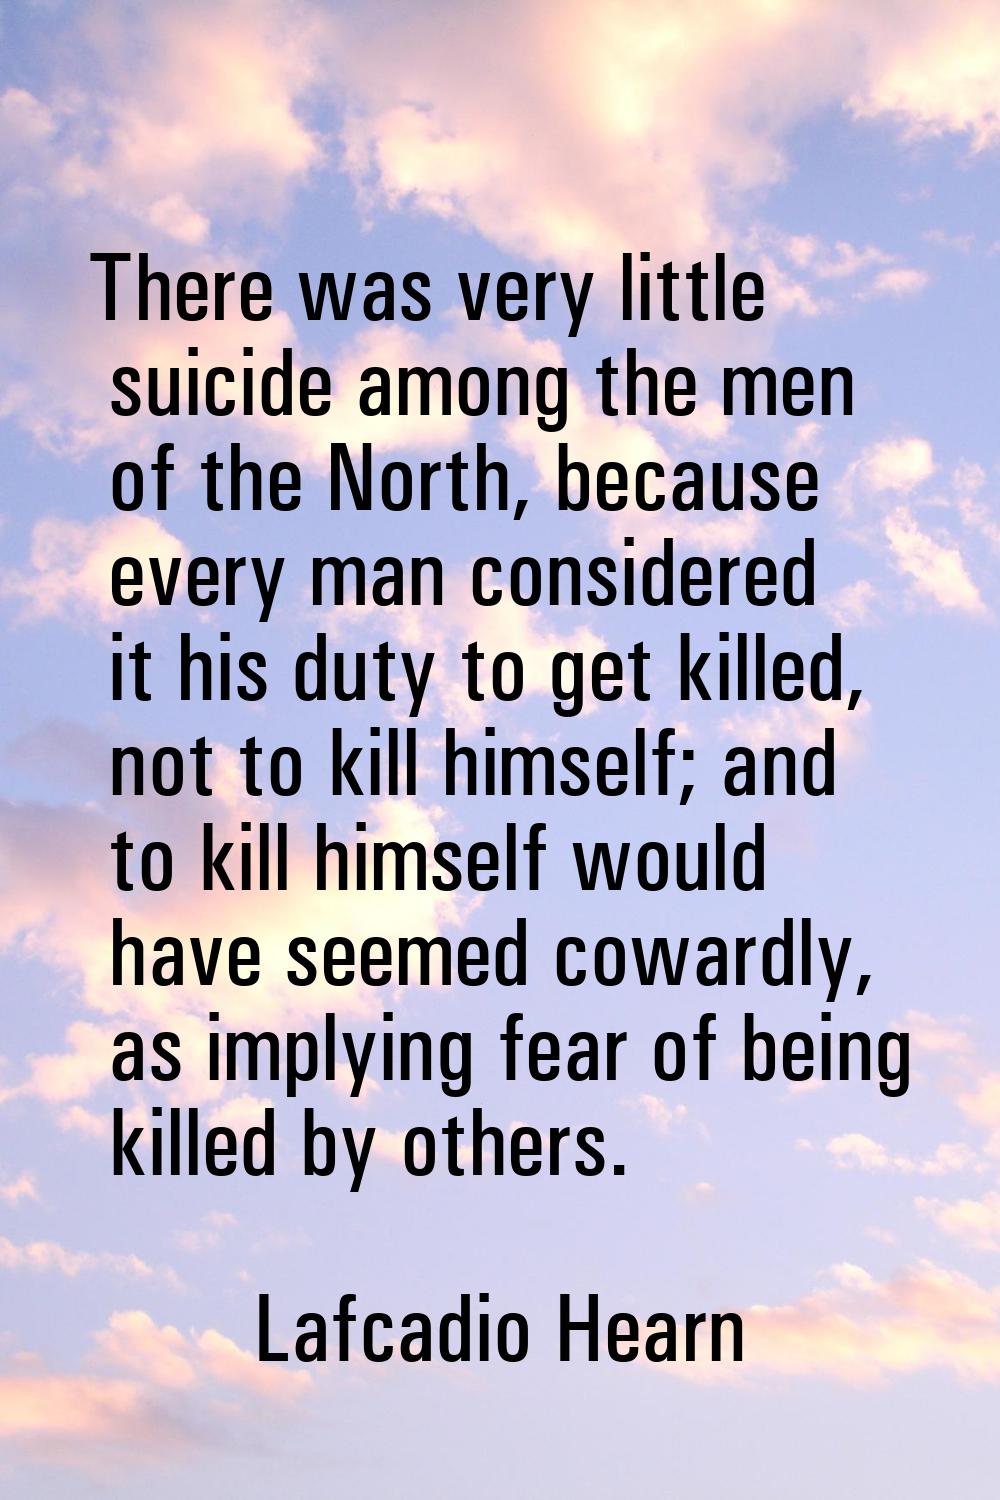 There was very little suicide among the men of the North, because every man considered it his duty 